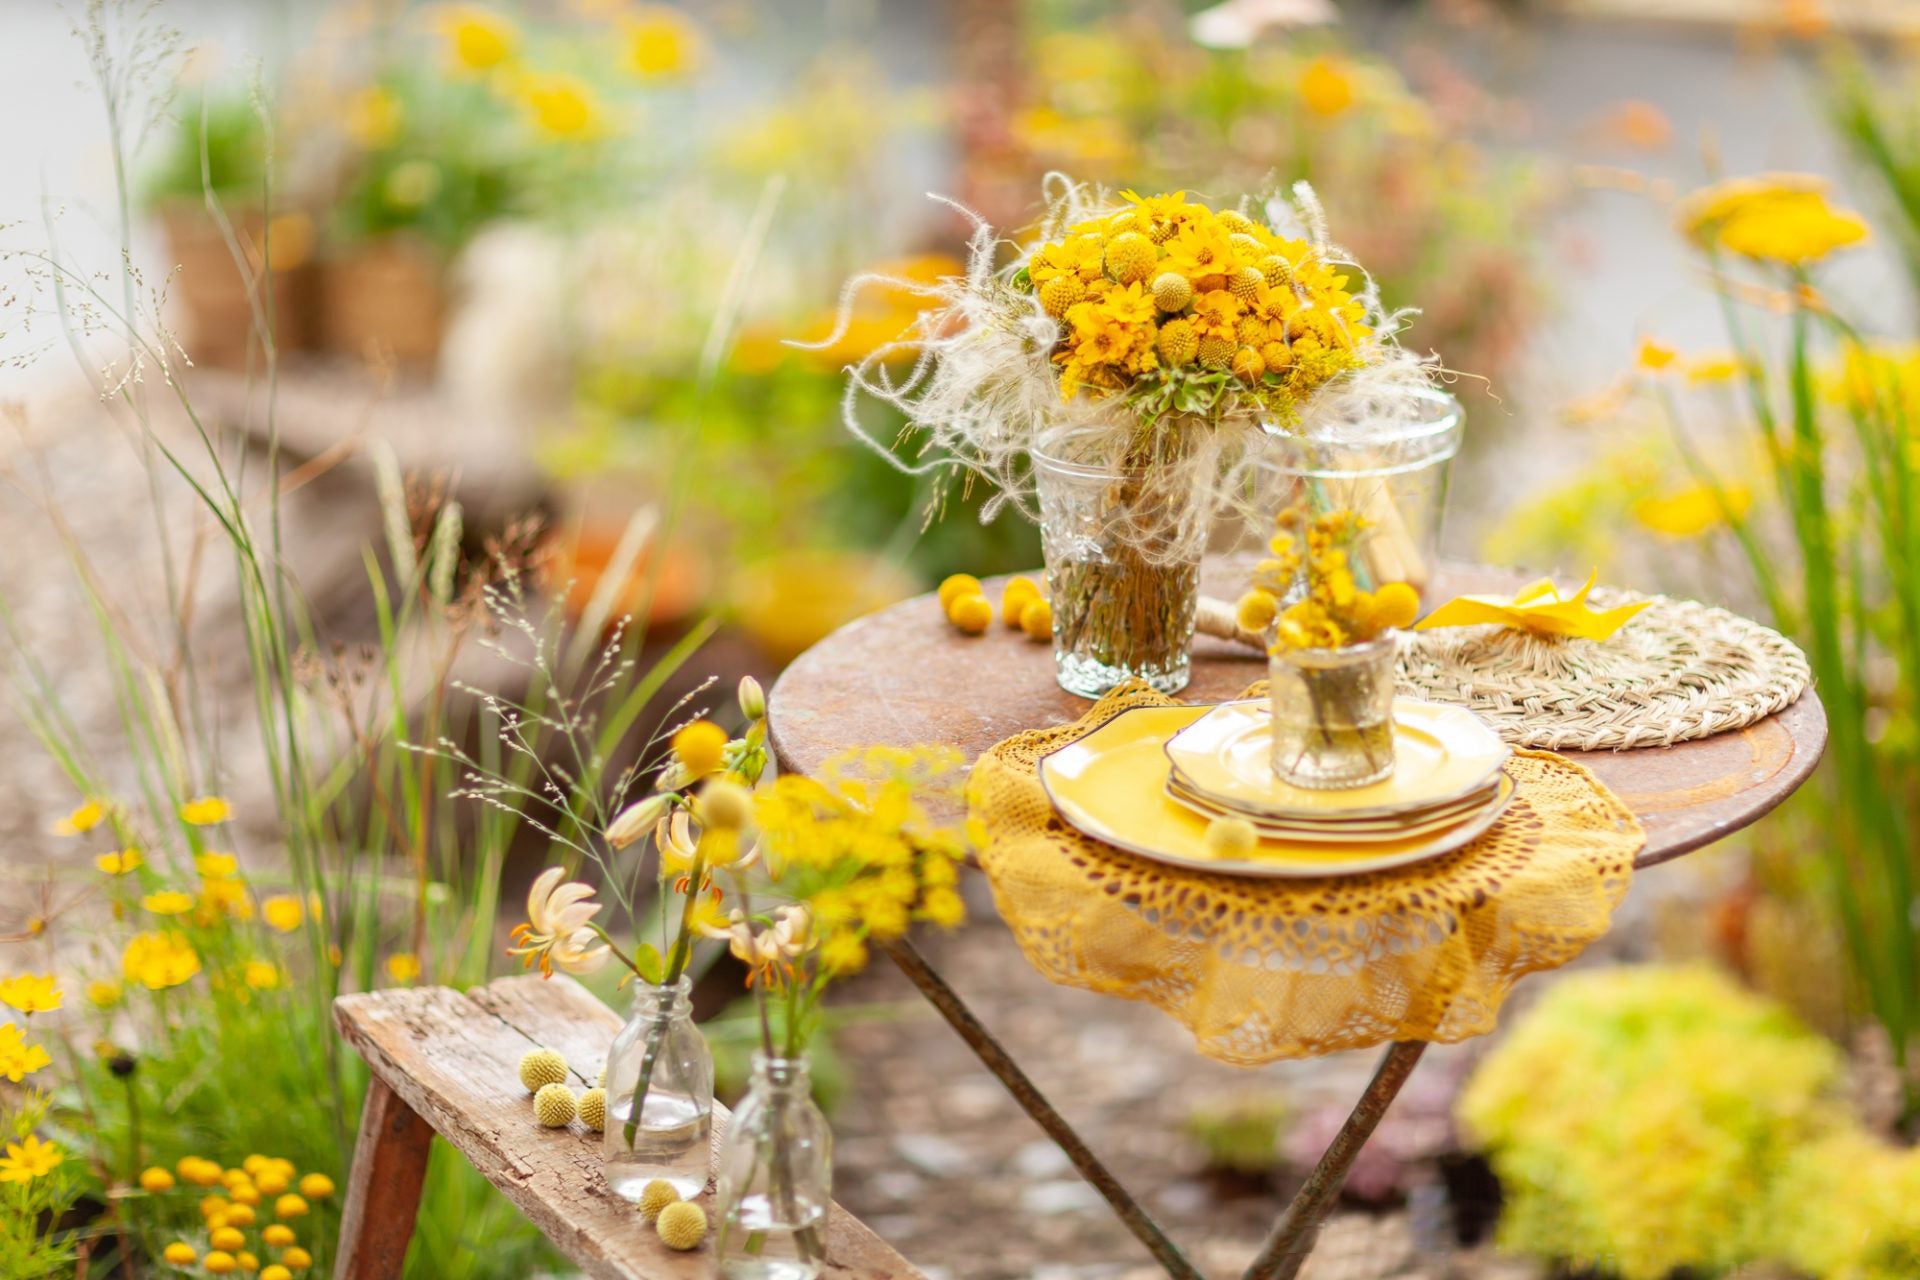 detail of set up with yellow flowers